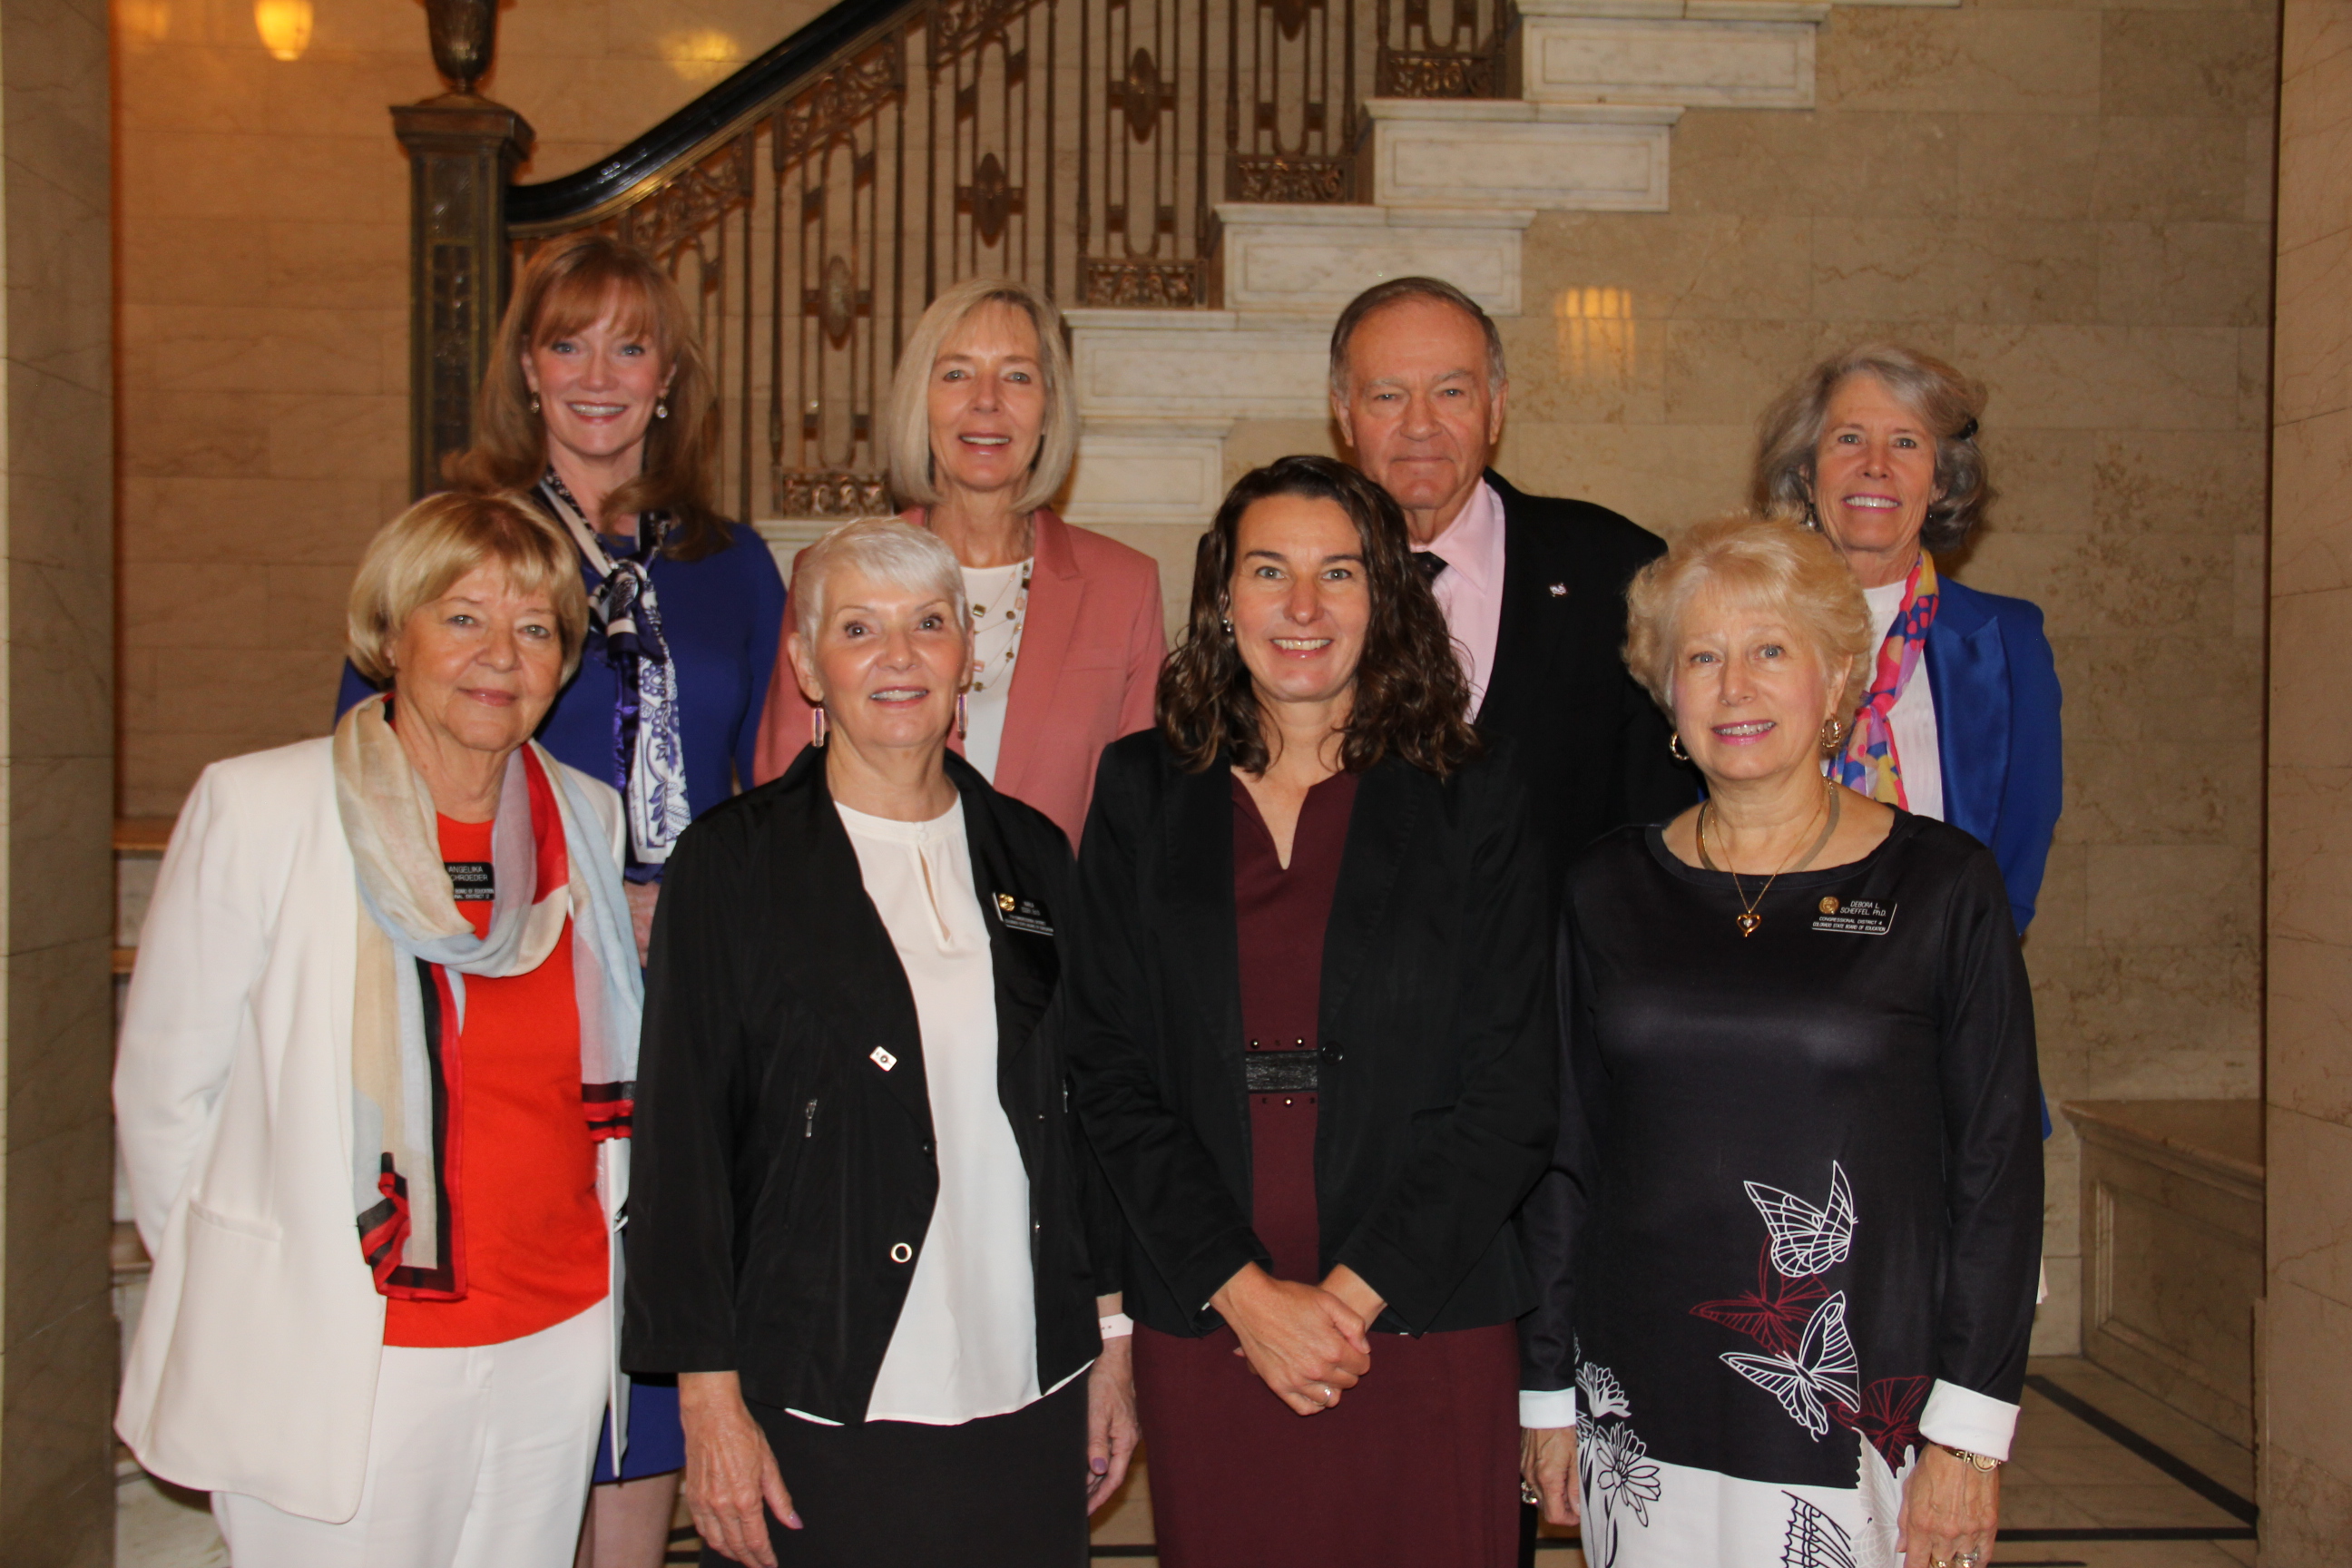 Group photo of State Board of Education members with Commissioner Katy Anthes